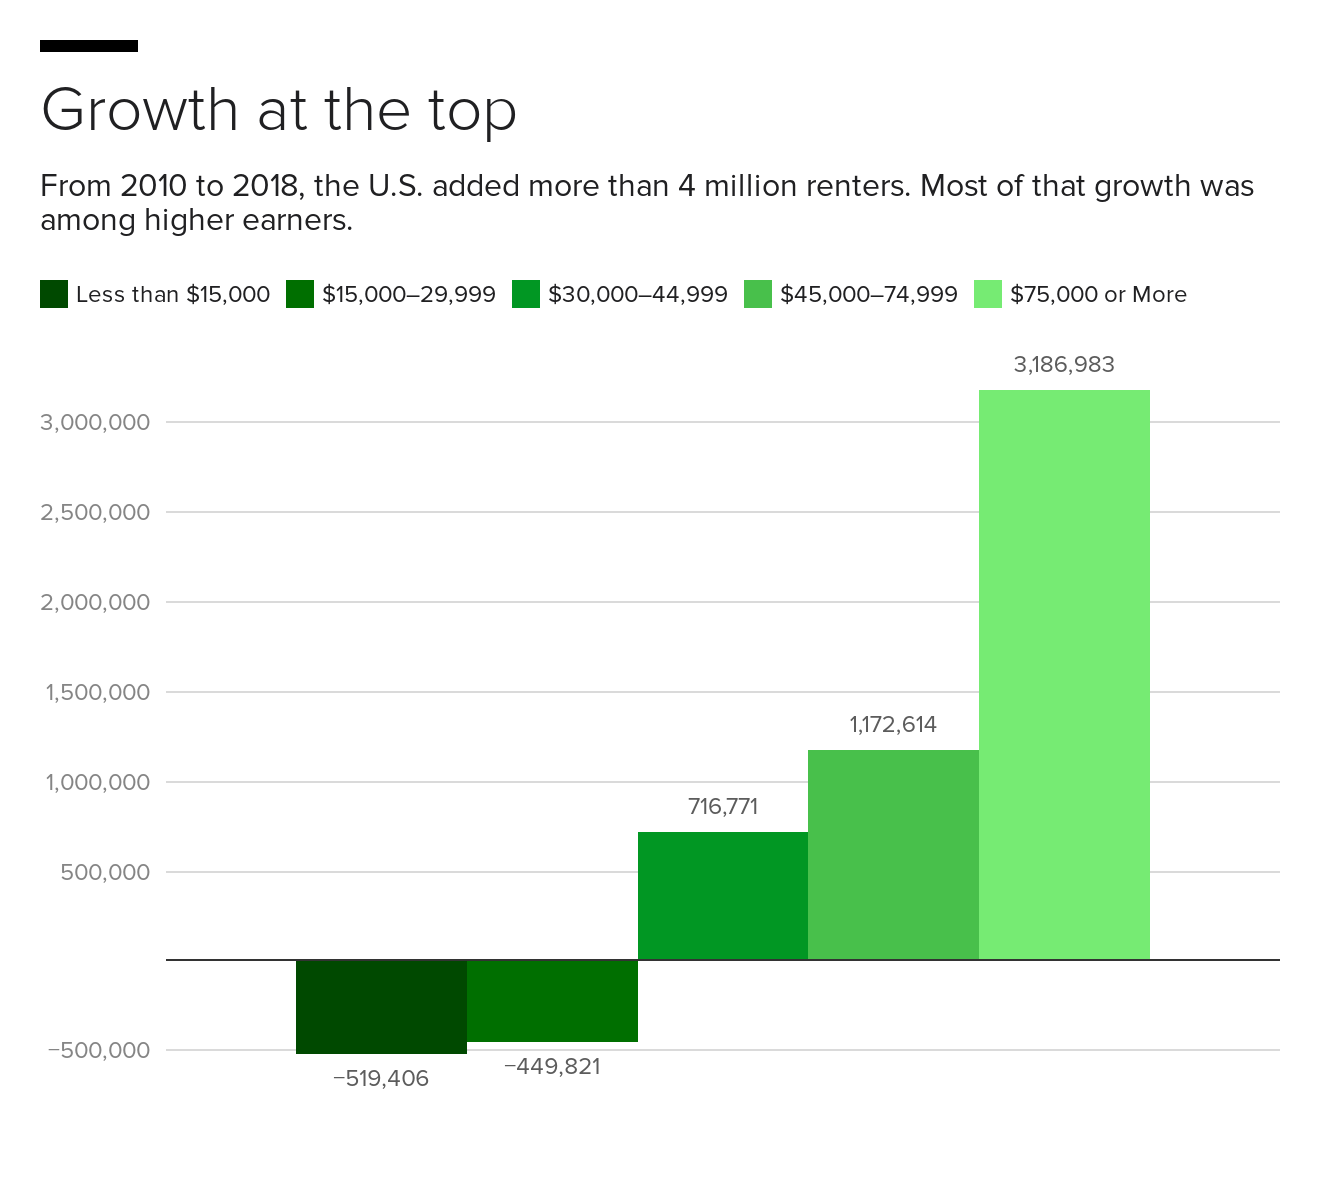 euep6-growth-at-the-top.png 